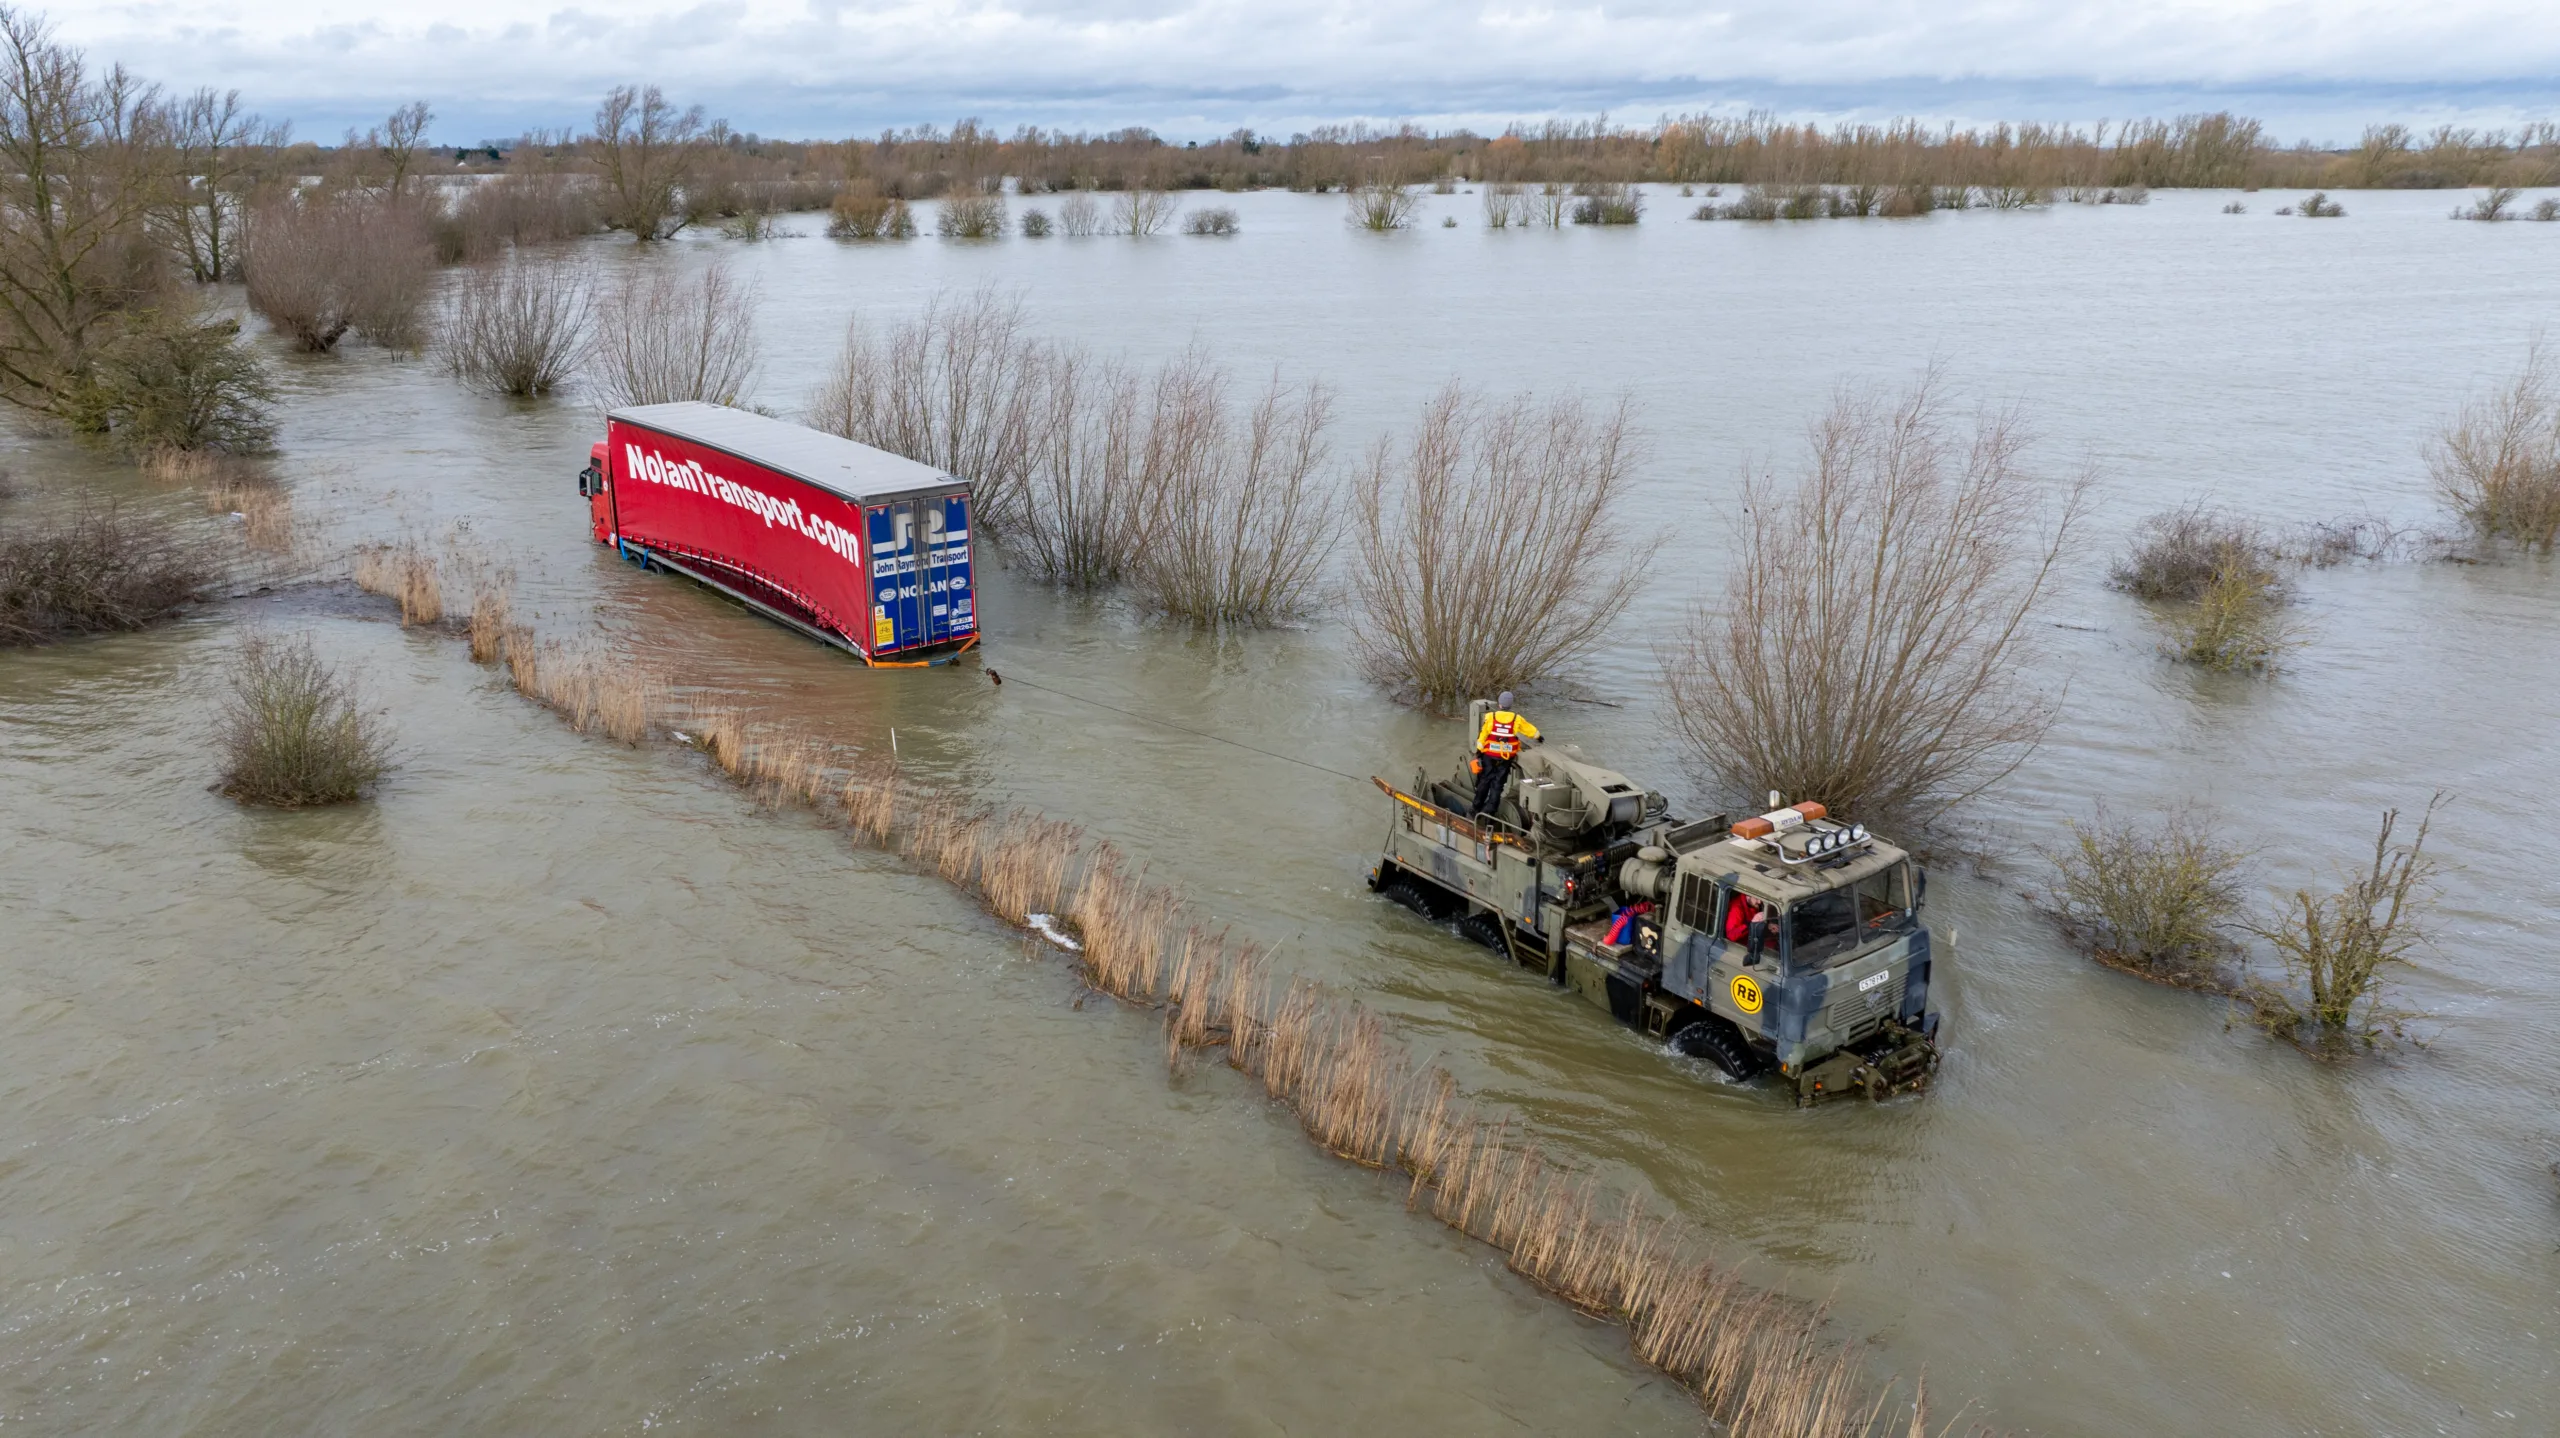 Recovery team from Manchetts were praised for their efforts in retrieving this cab and trailer that the driver was forced to abandon in the early hours of Monday on the flooded A1101 Welney Wash Road. PHOTO: Bav Media